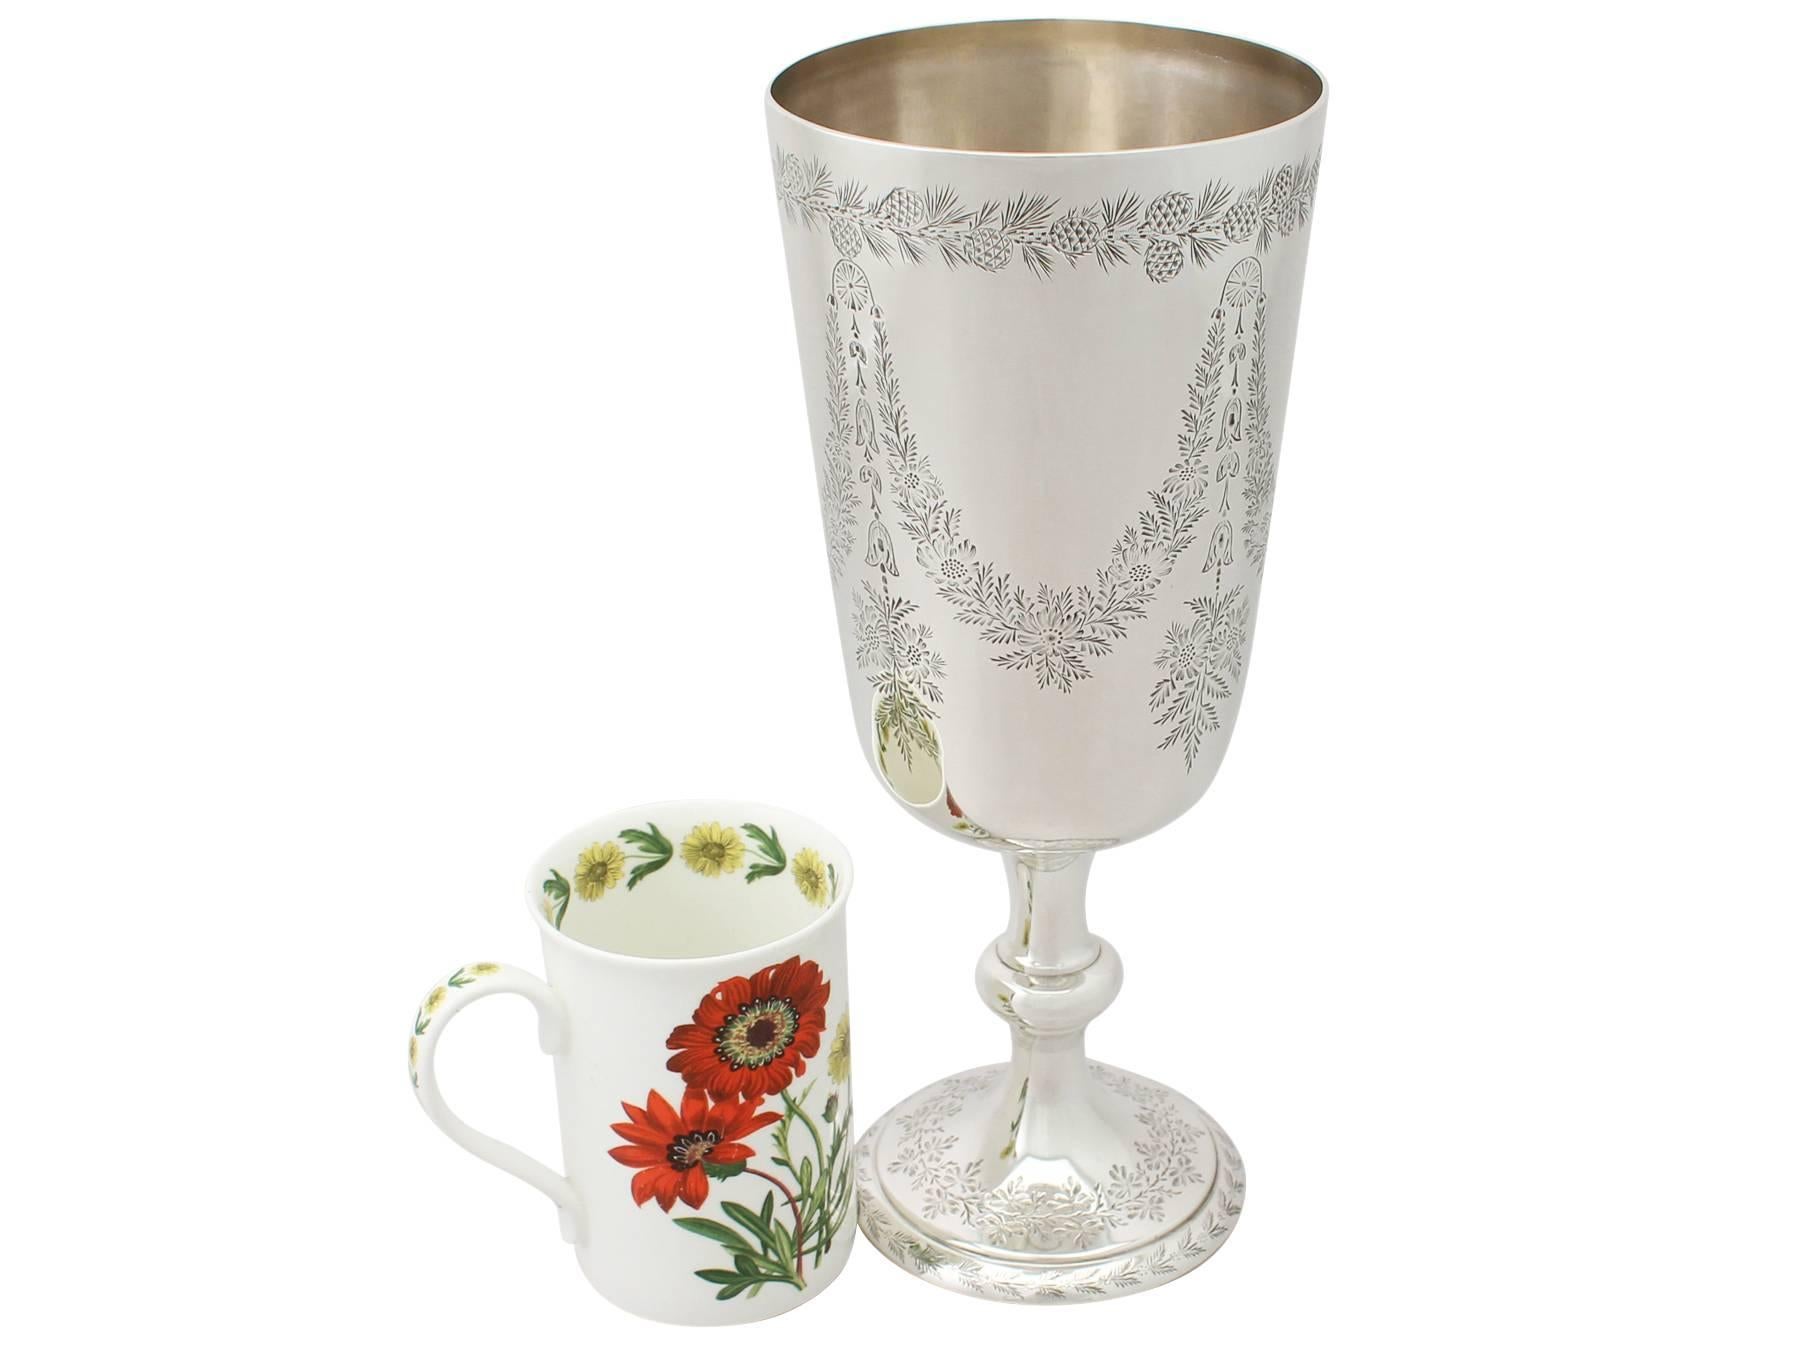 A fine and impressive antique Victorian English sterling silver presentation cup / trophy; part of our silverware collection.

This impressive antique Victorian sterling silver cup/trophy has a circular tapering, bell shaped form to a knopped